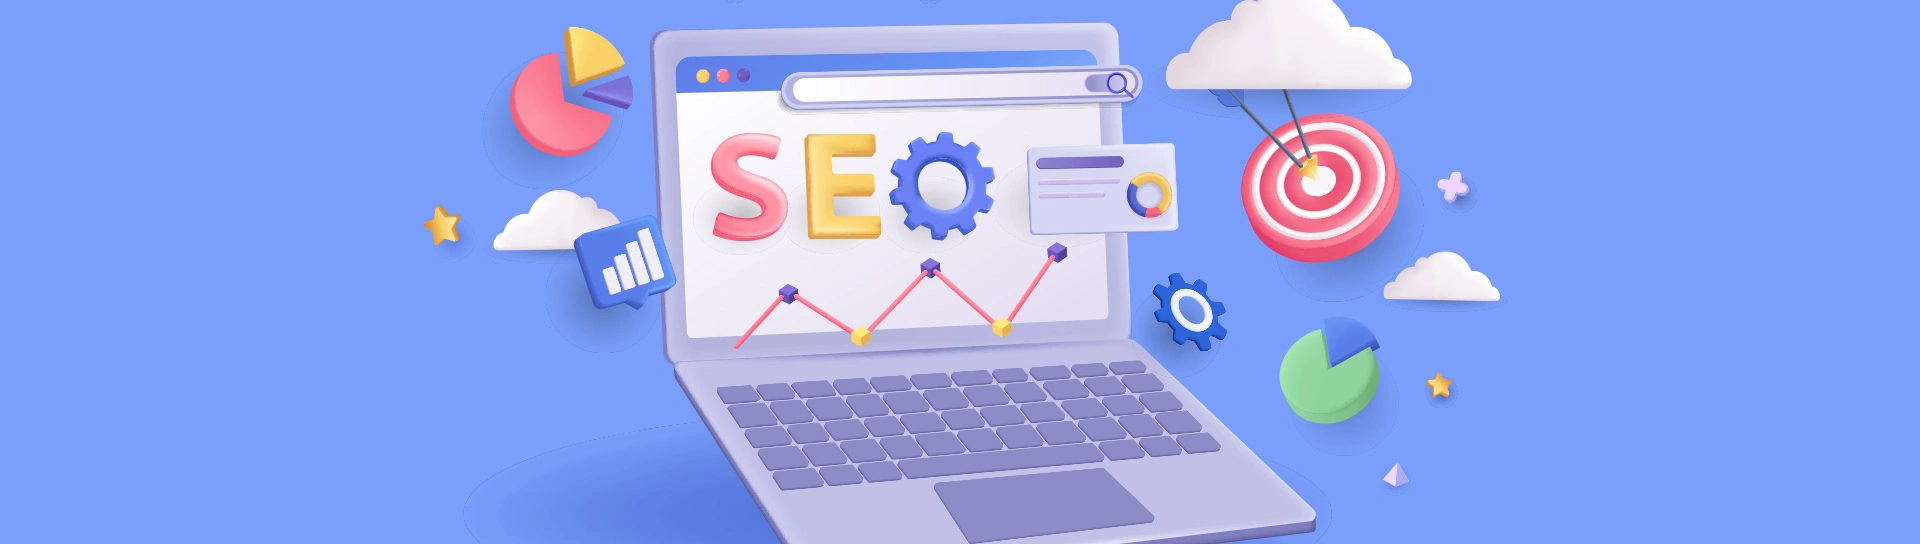 SEO Tips for Small Businesses in 2022